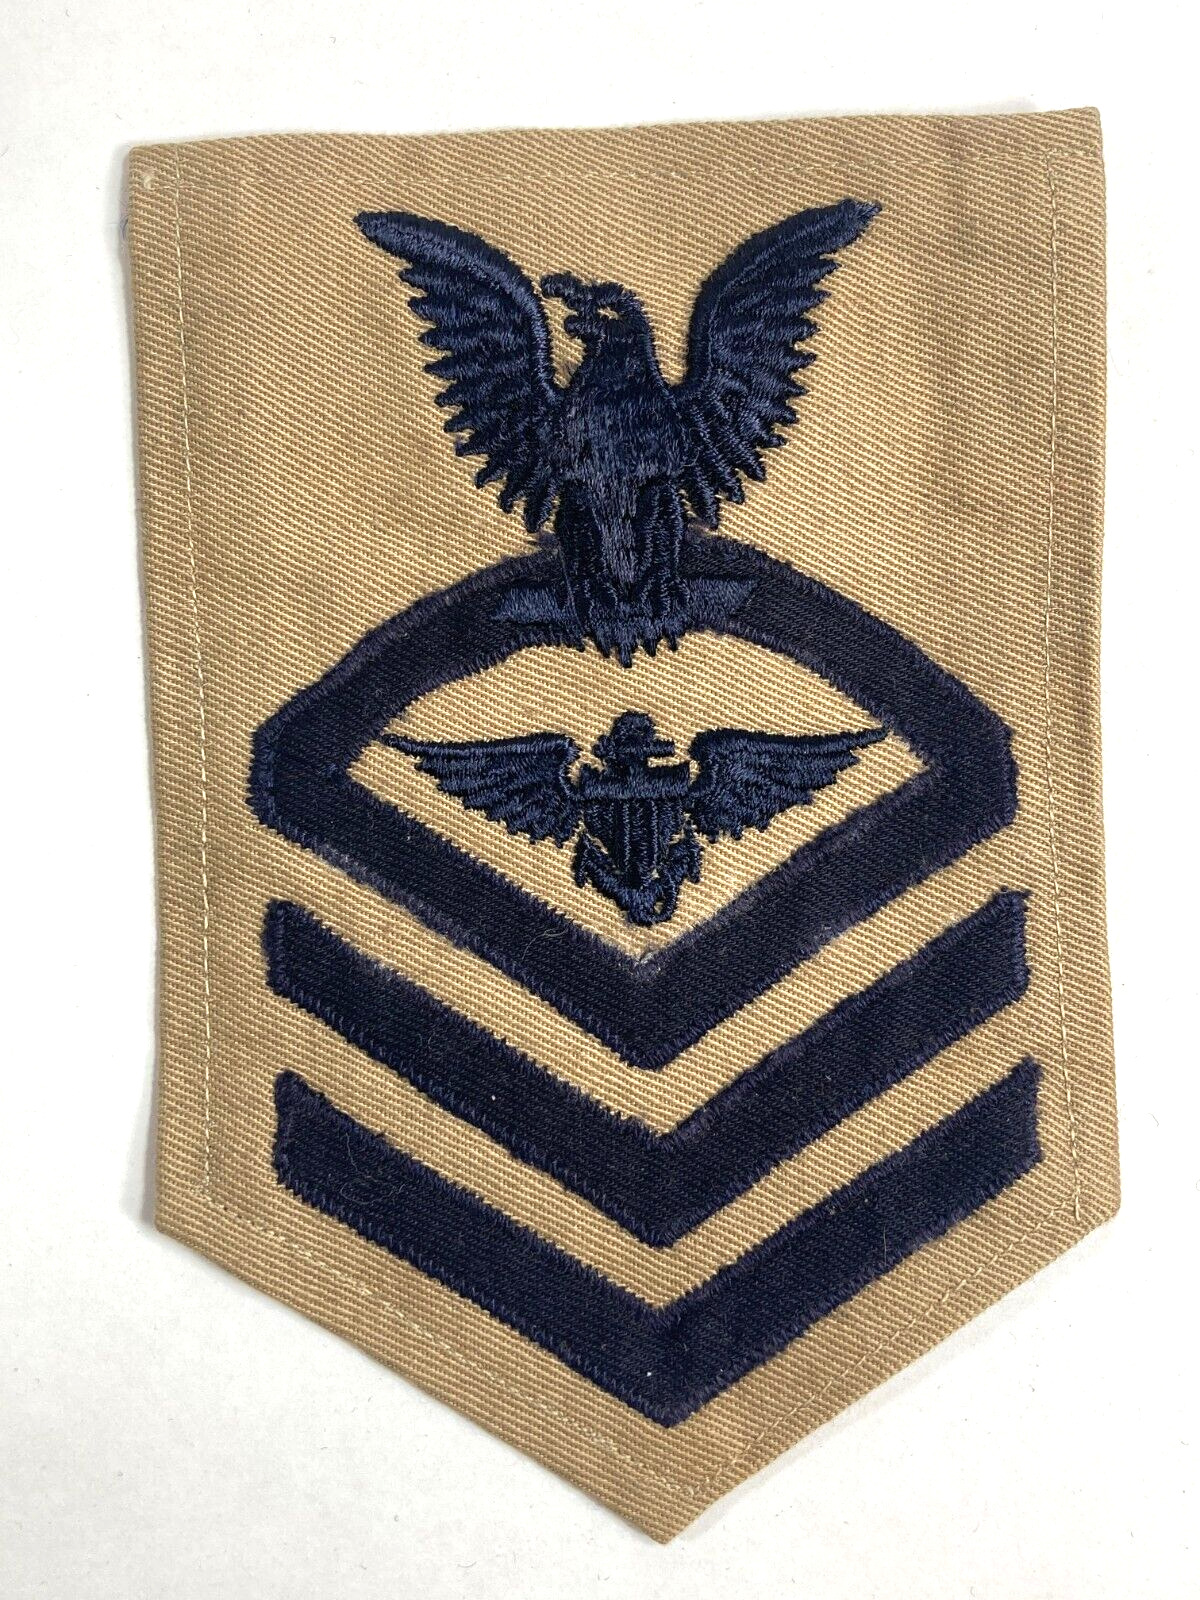 WW2 USN US Navy CPO Chief Petty Officer Enlisted Pilot Rank Rate Tan